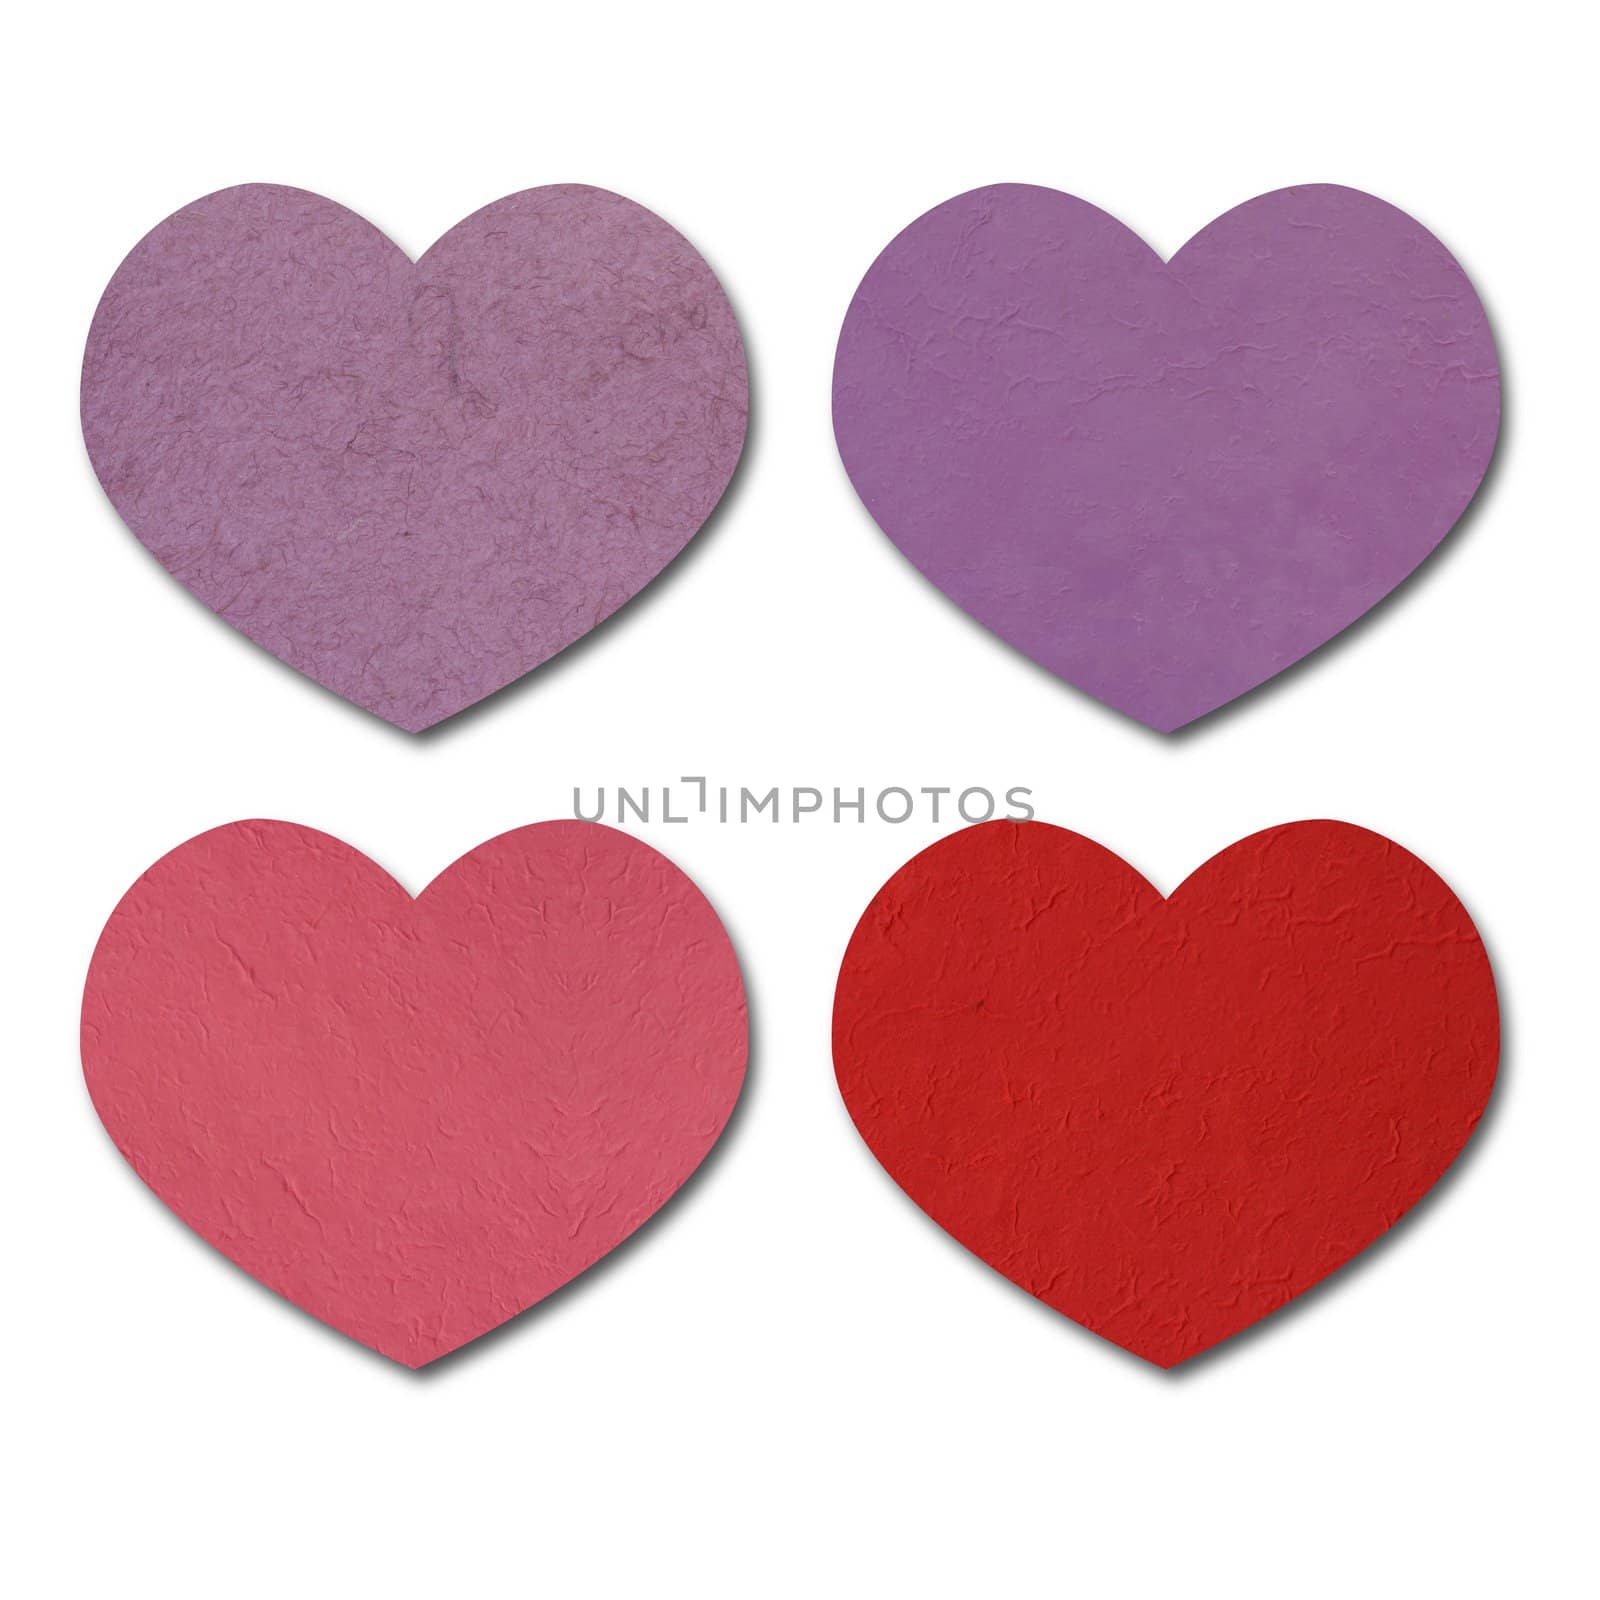 Love heart mulberry paper collection.